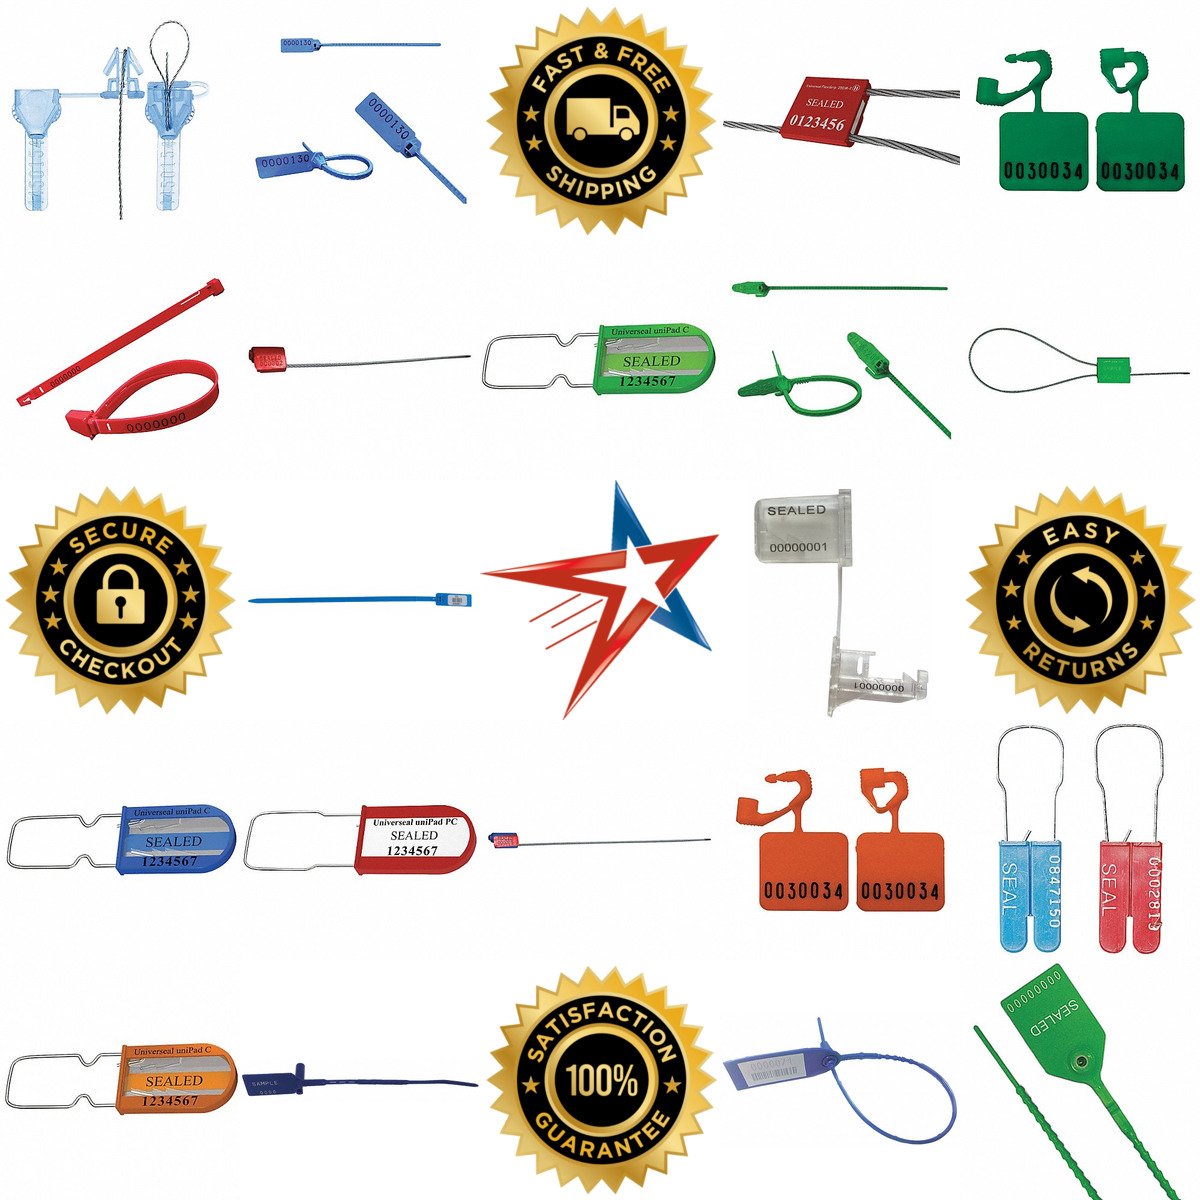 A selection of Security Seals products on GoVets